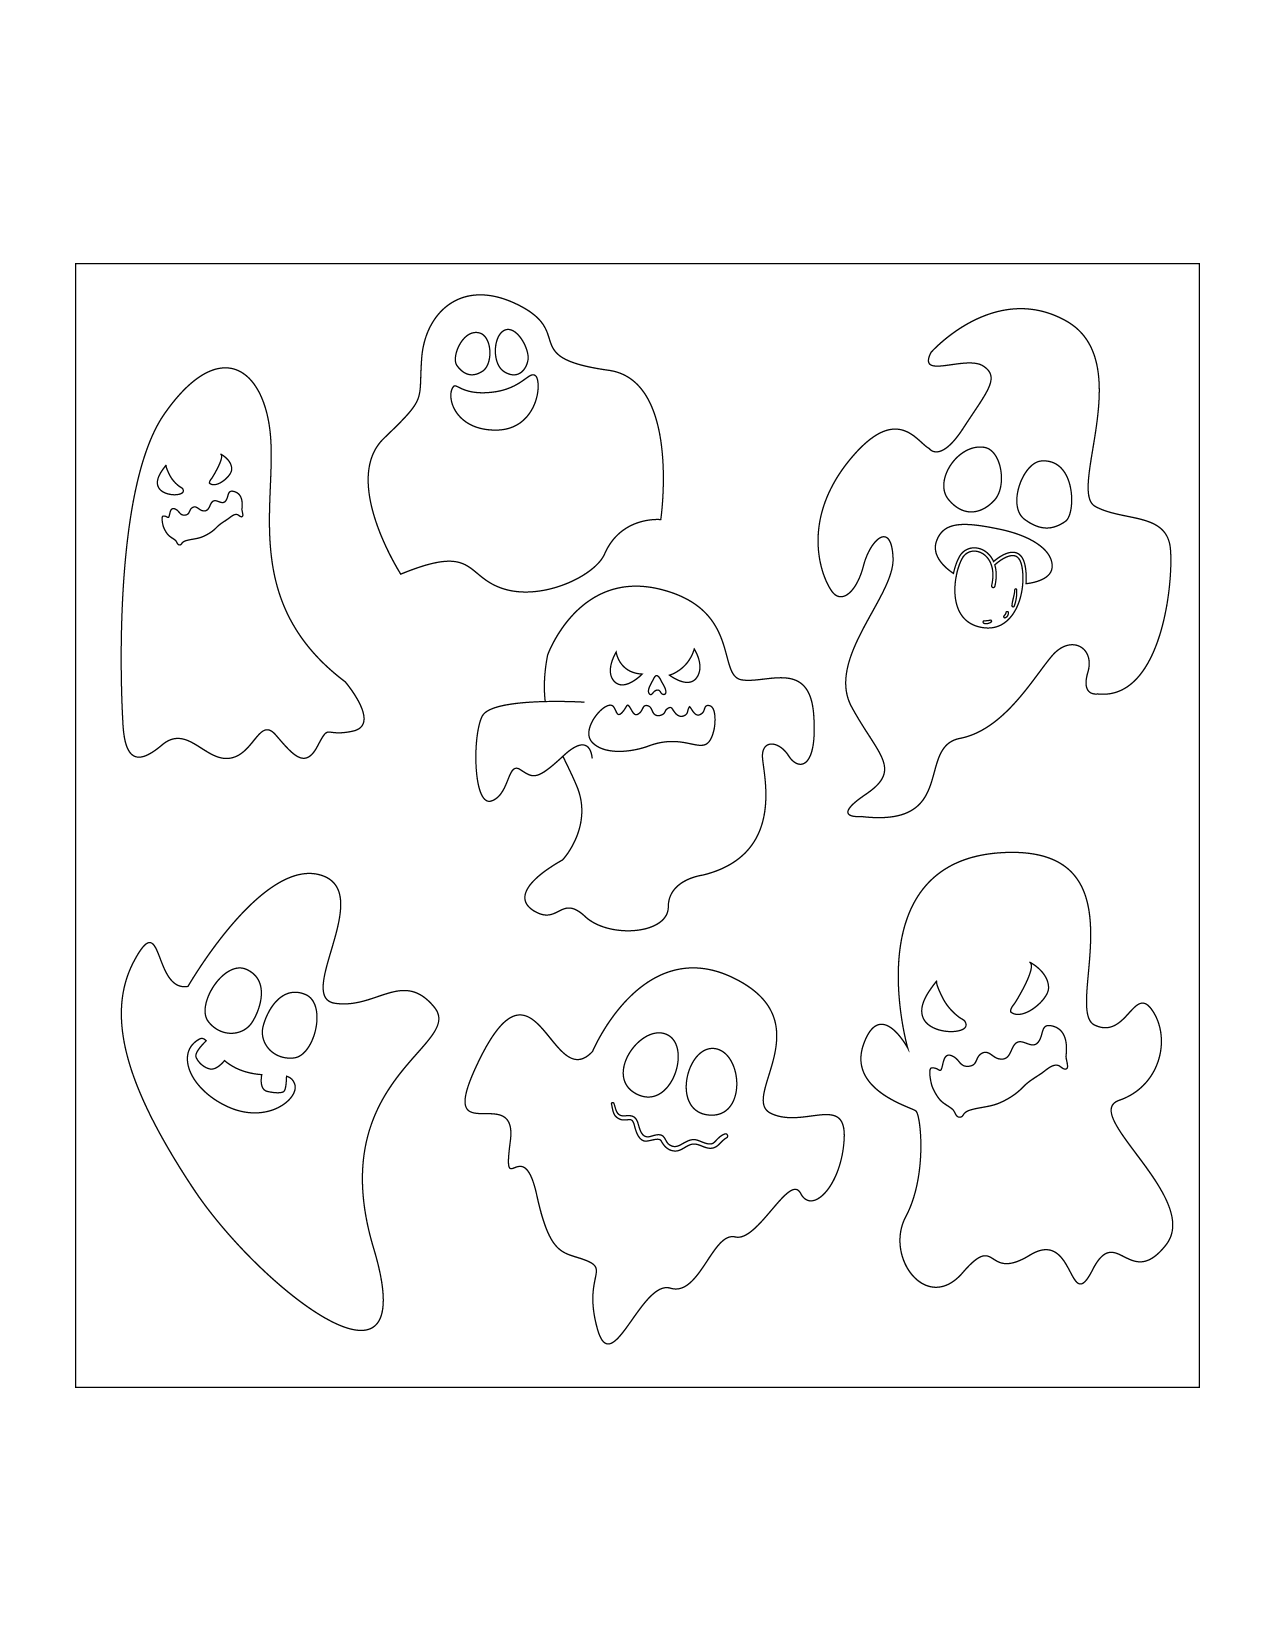 Halloween Ghosts Coloring Page